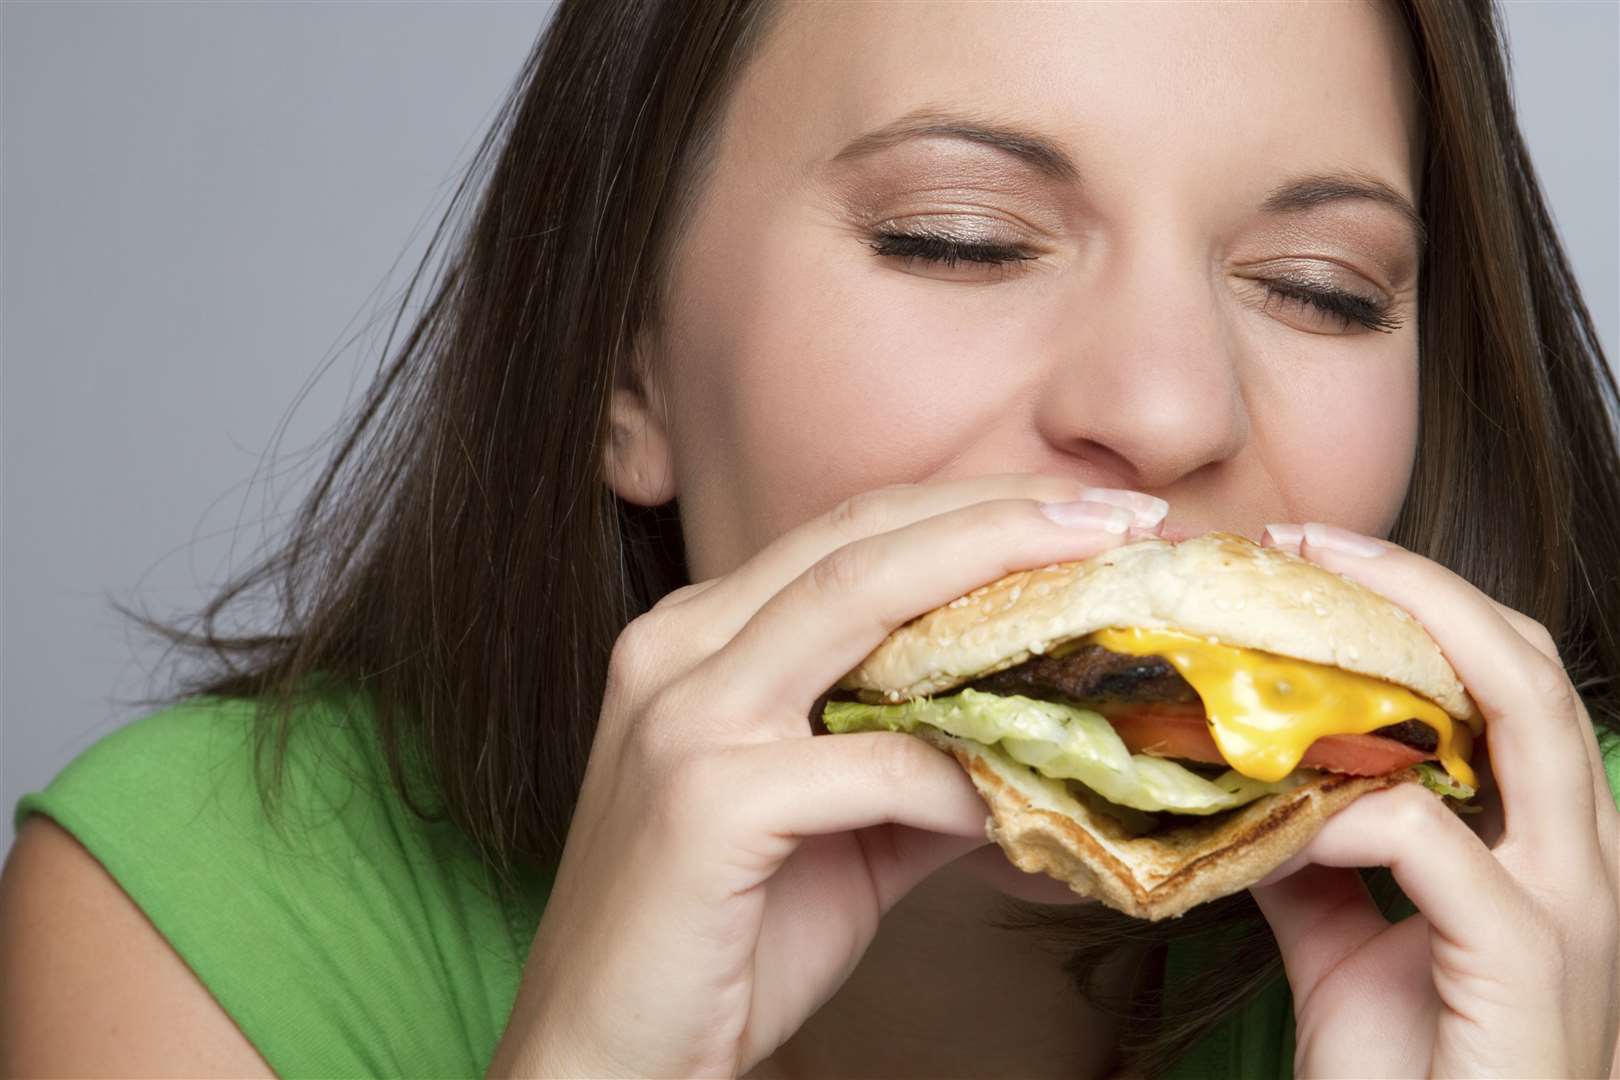 Some restaurants and takeaways will be forced to add calorie labels to menus Picture: iStock.com